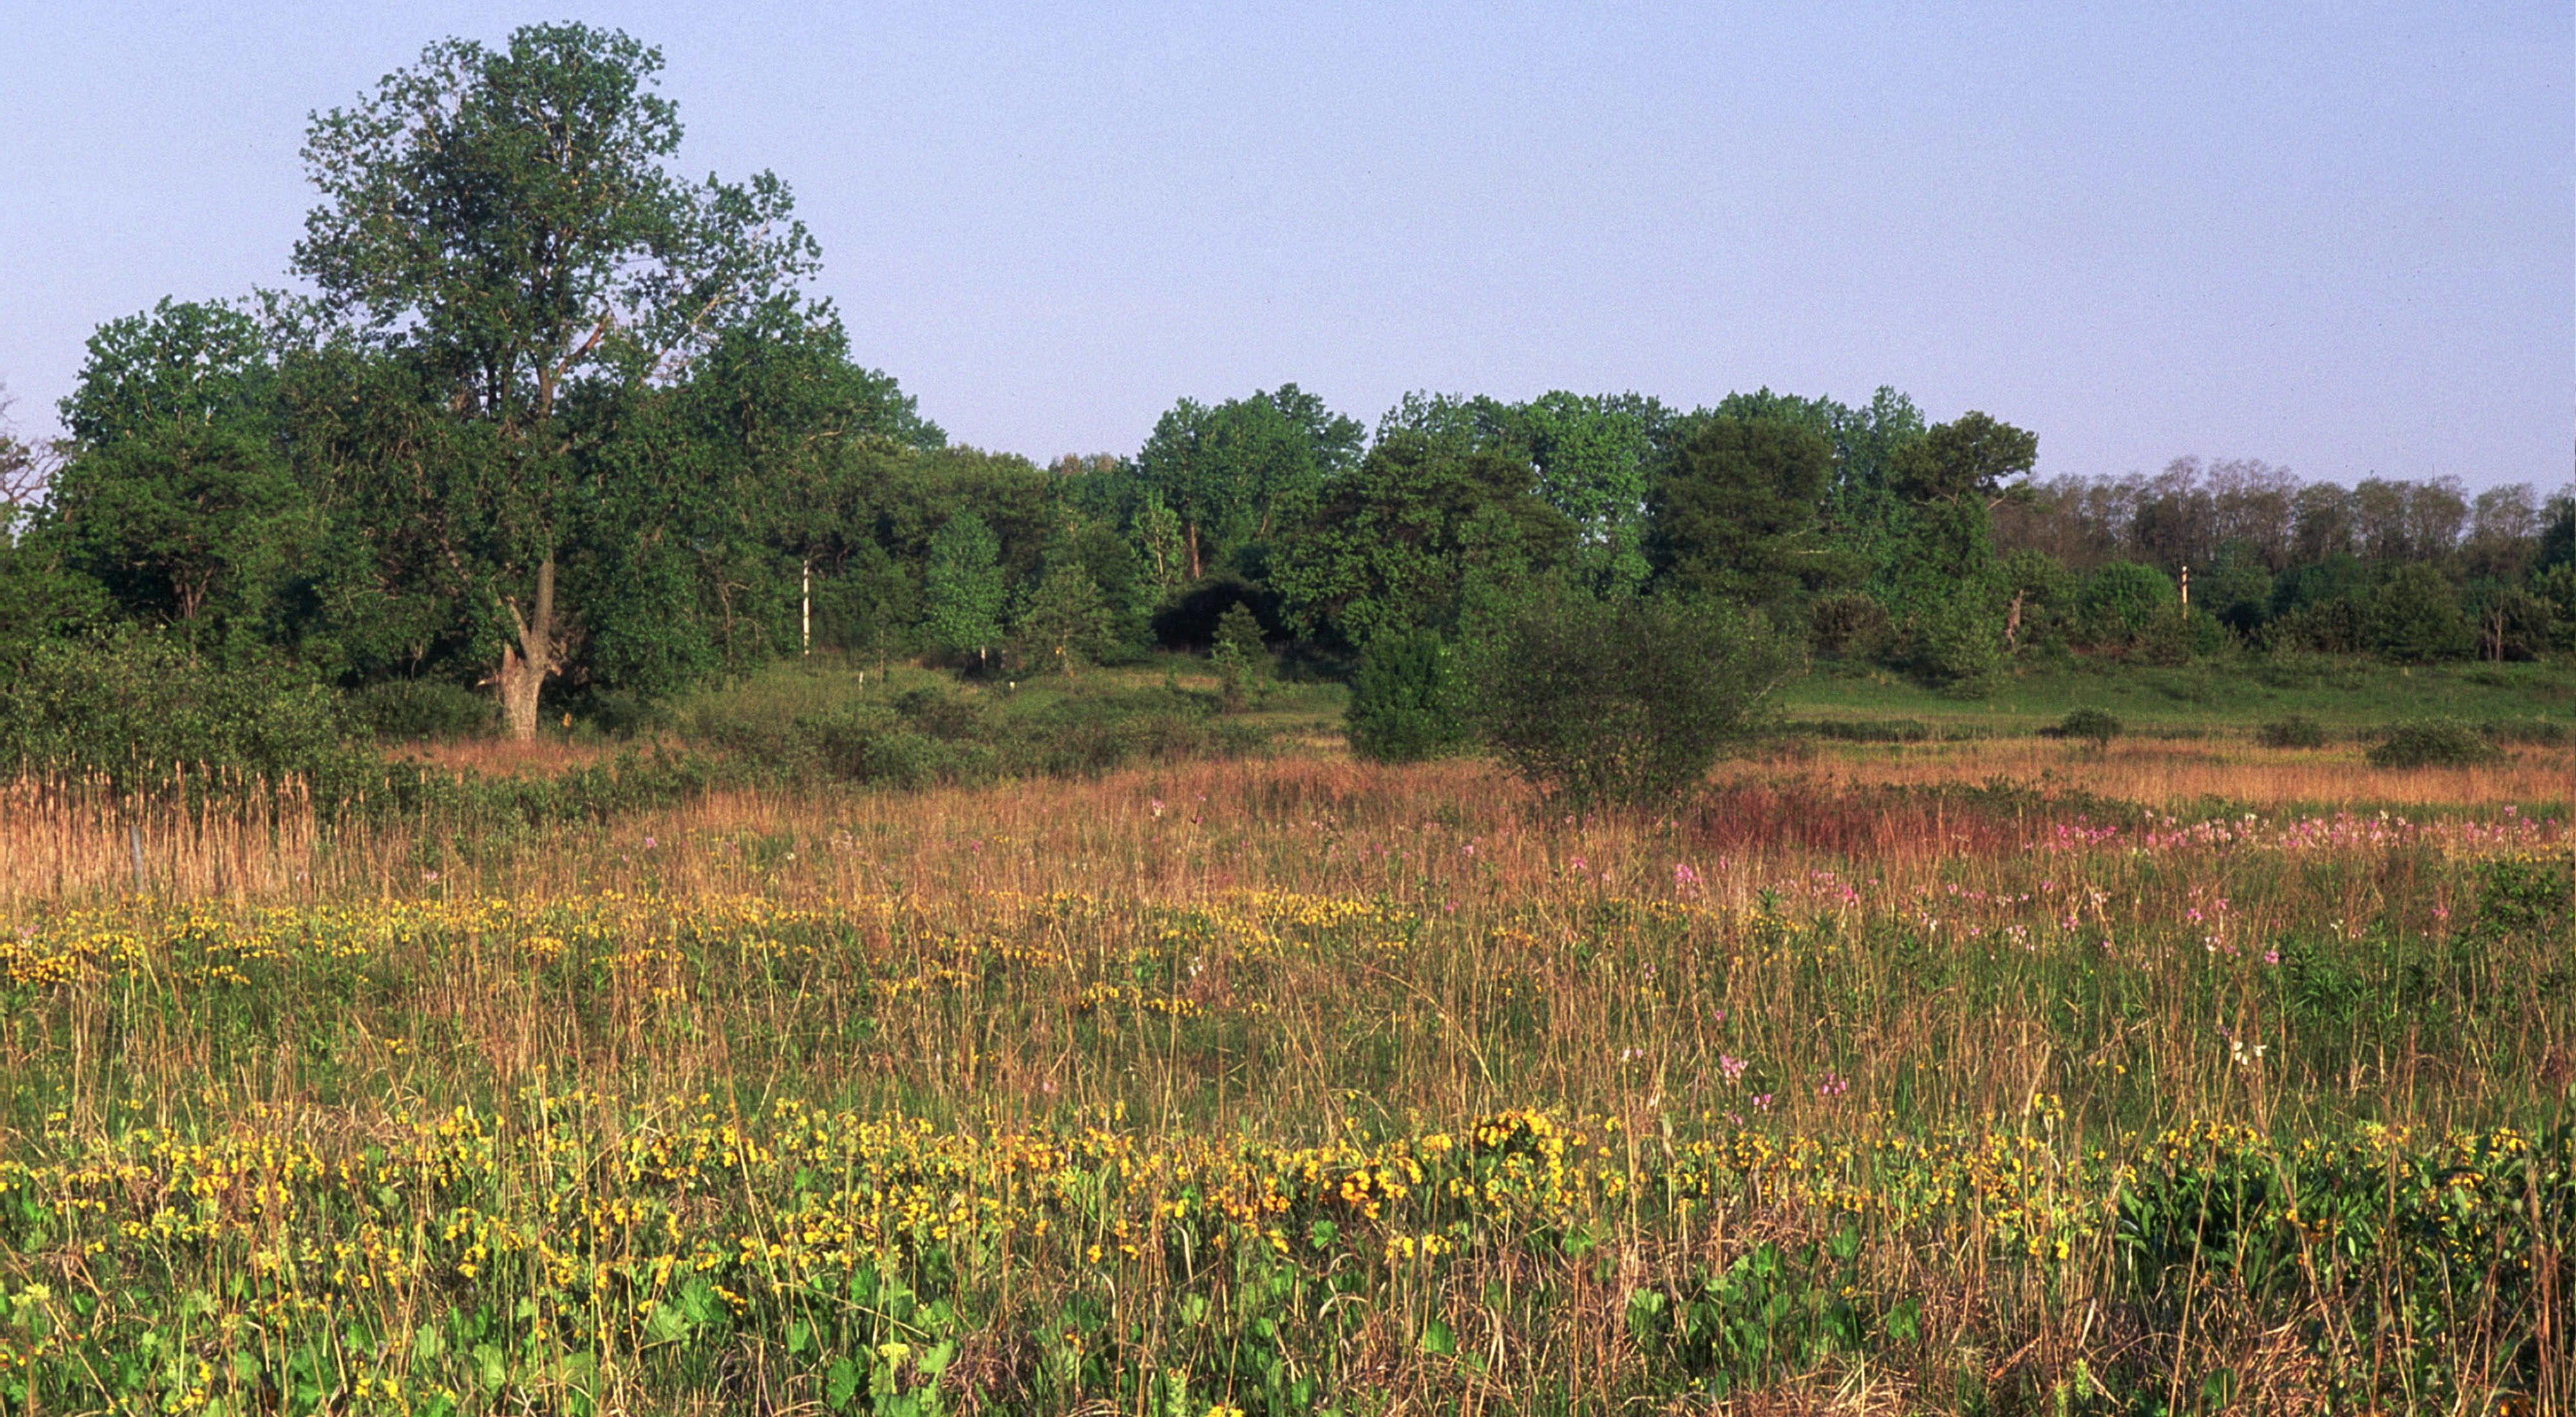 Flowering grasslands with trees in the background. 